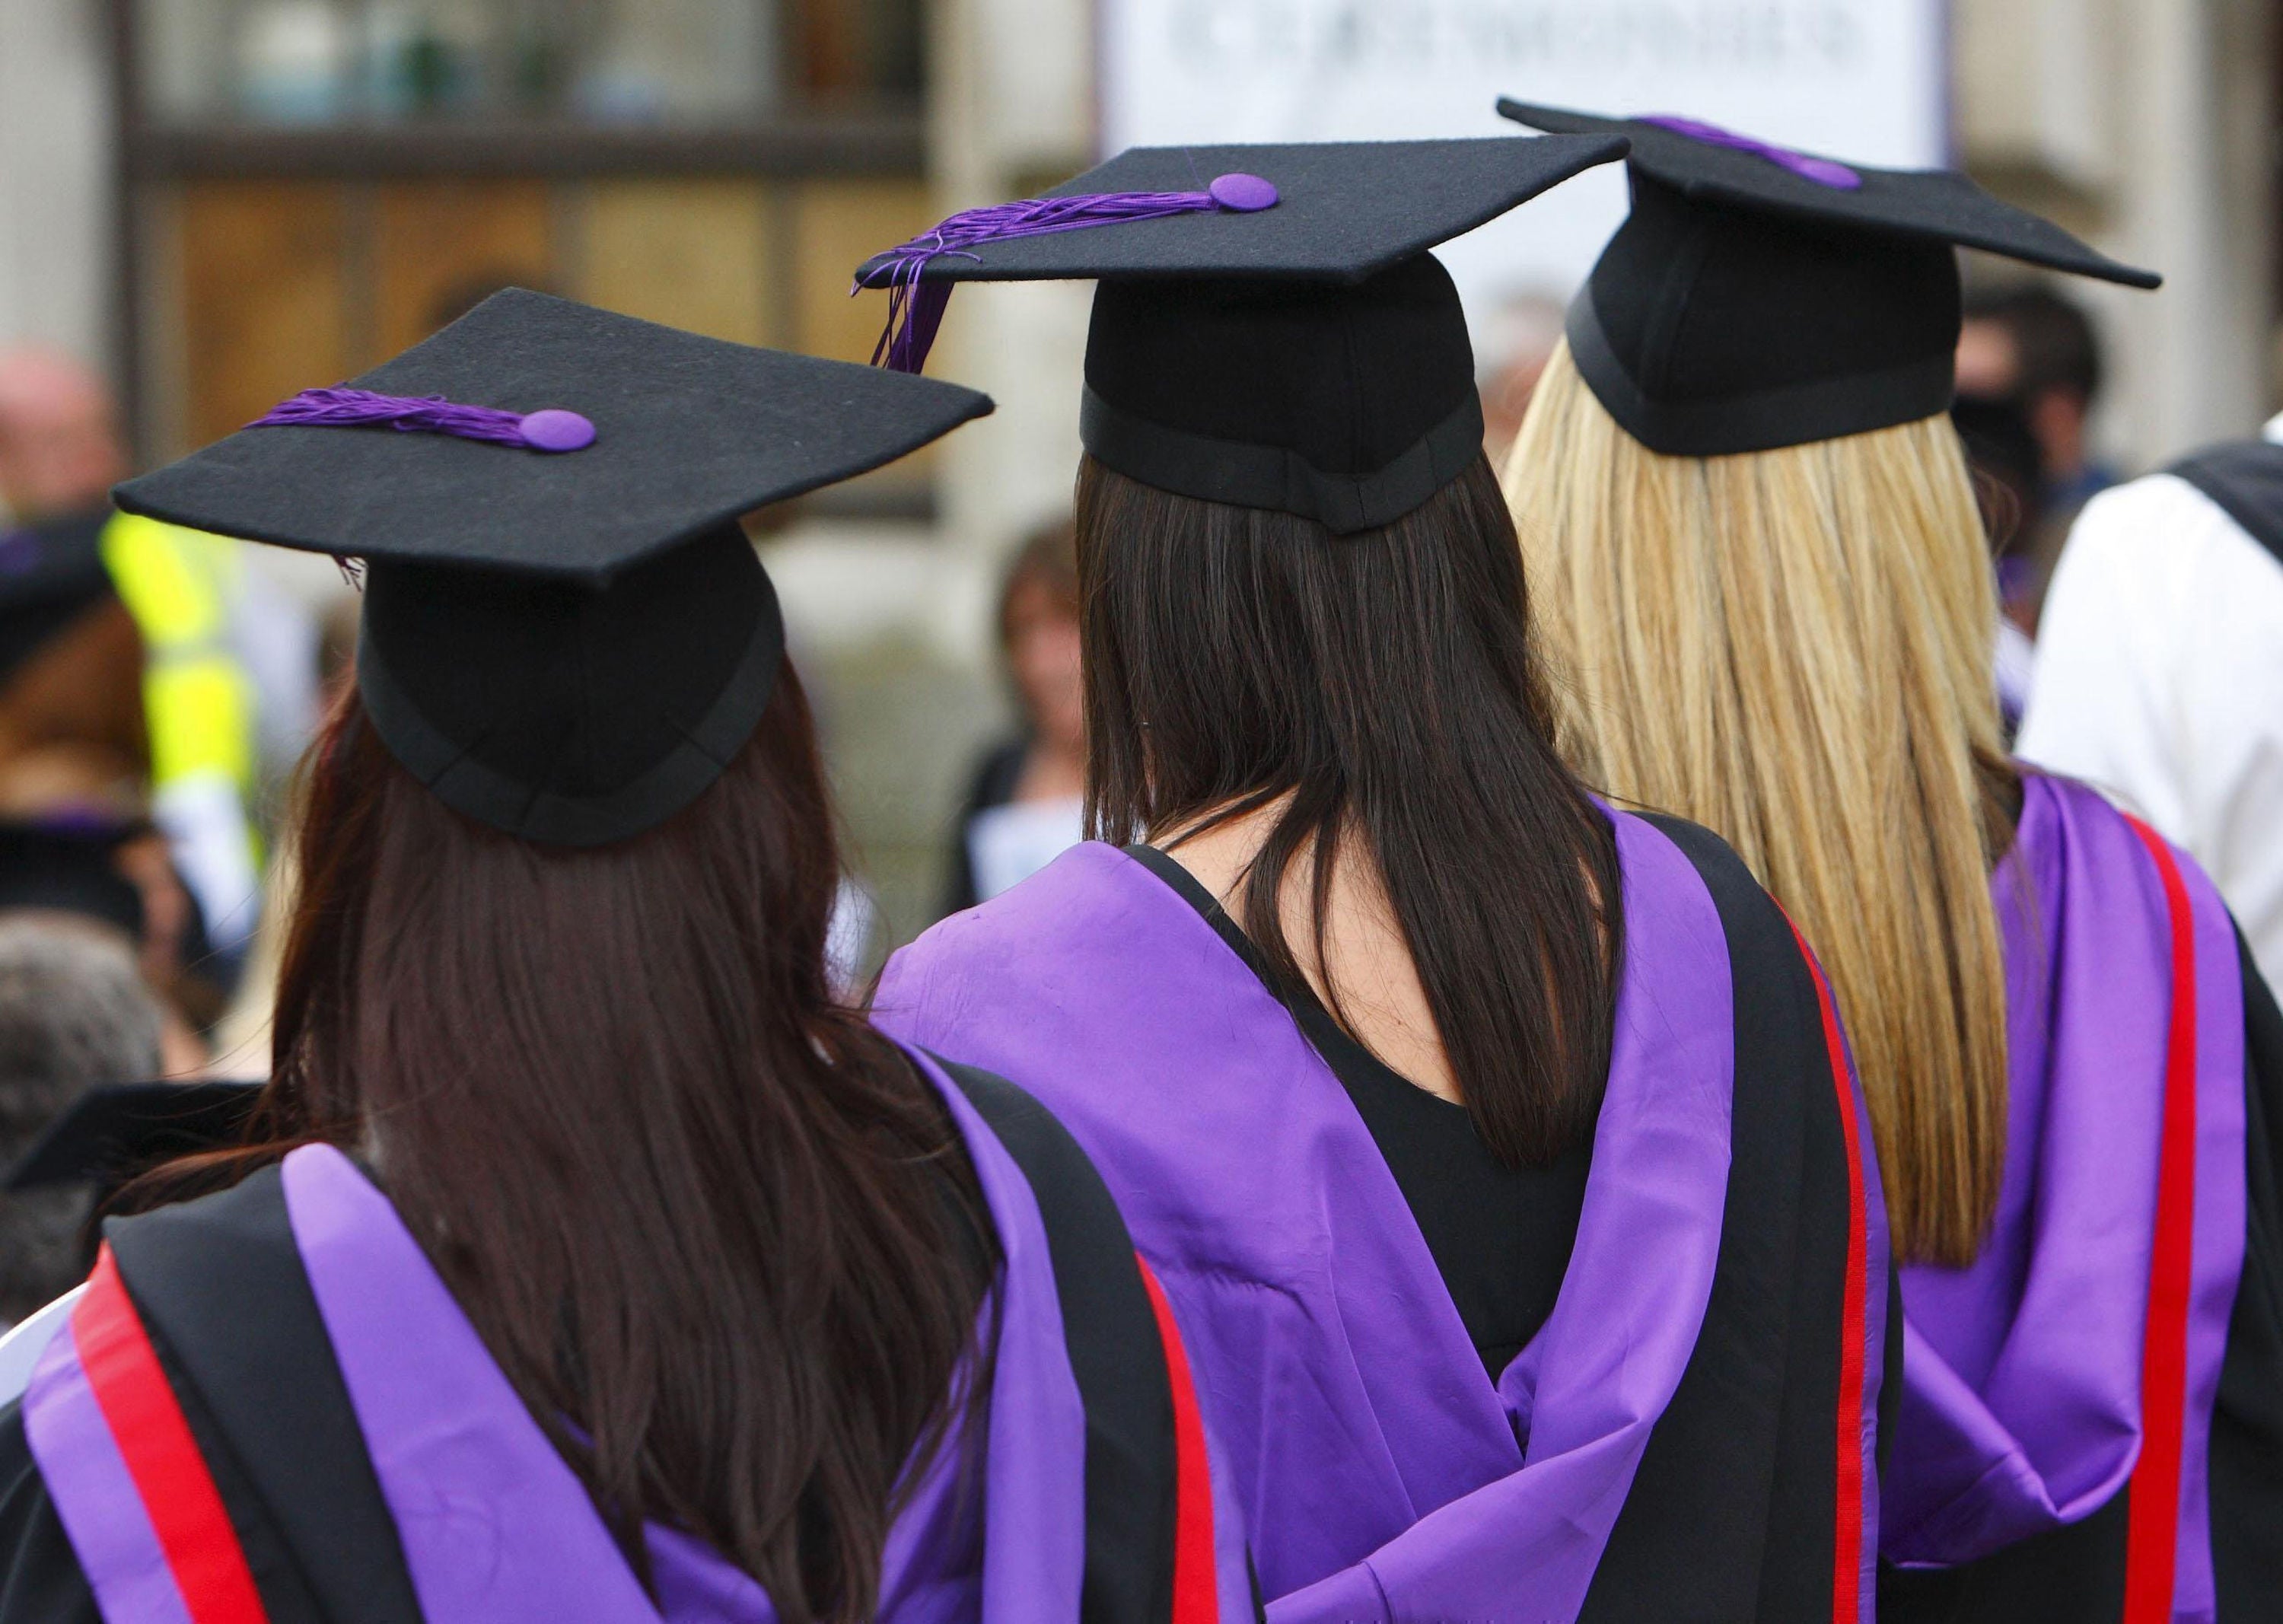 Higher education applications are expected to jump to a million by 2026, Ucas says